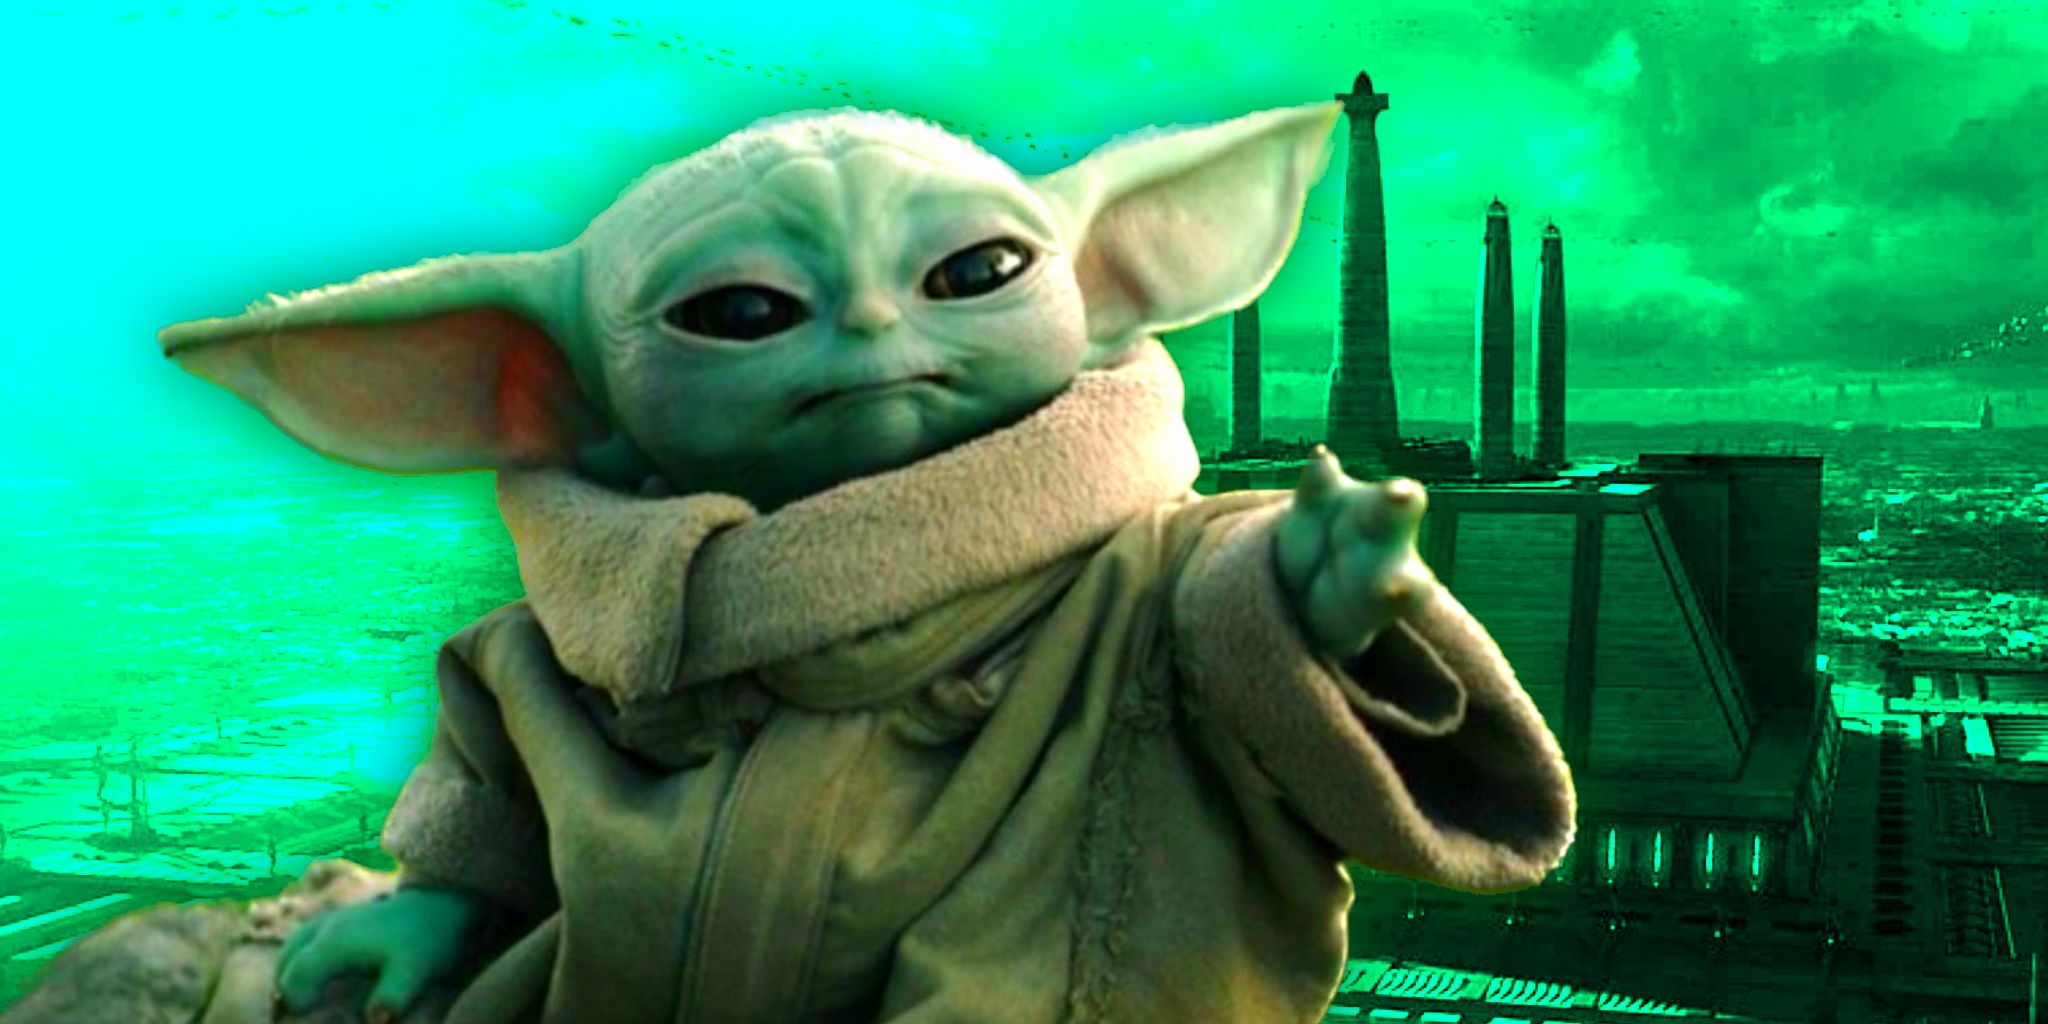 Star Wars Introduced A Baby Yoda 14 Years Before The Mandalorian Season 1  (From A Certain Point Of View)